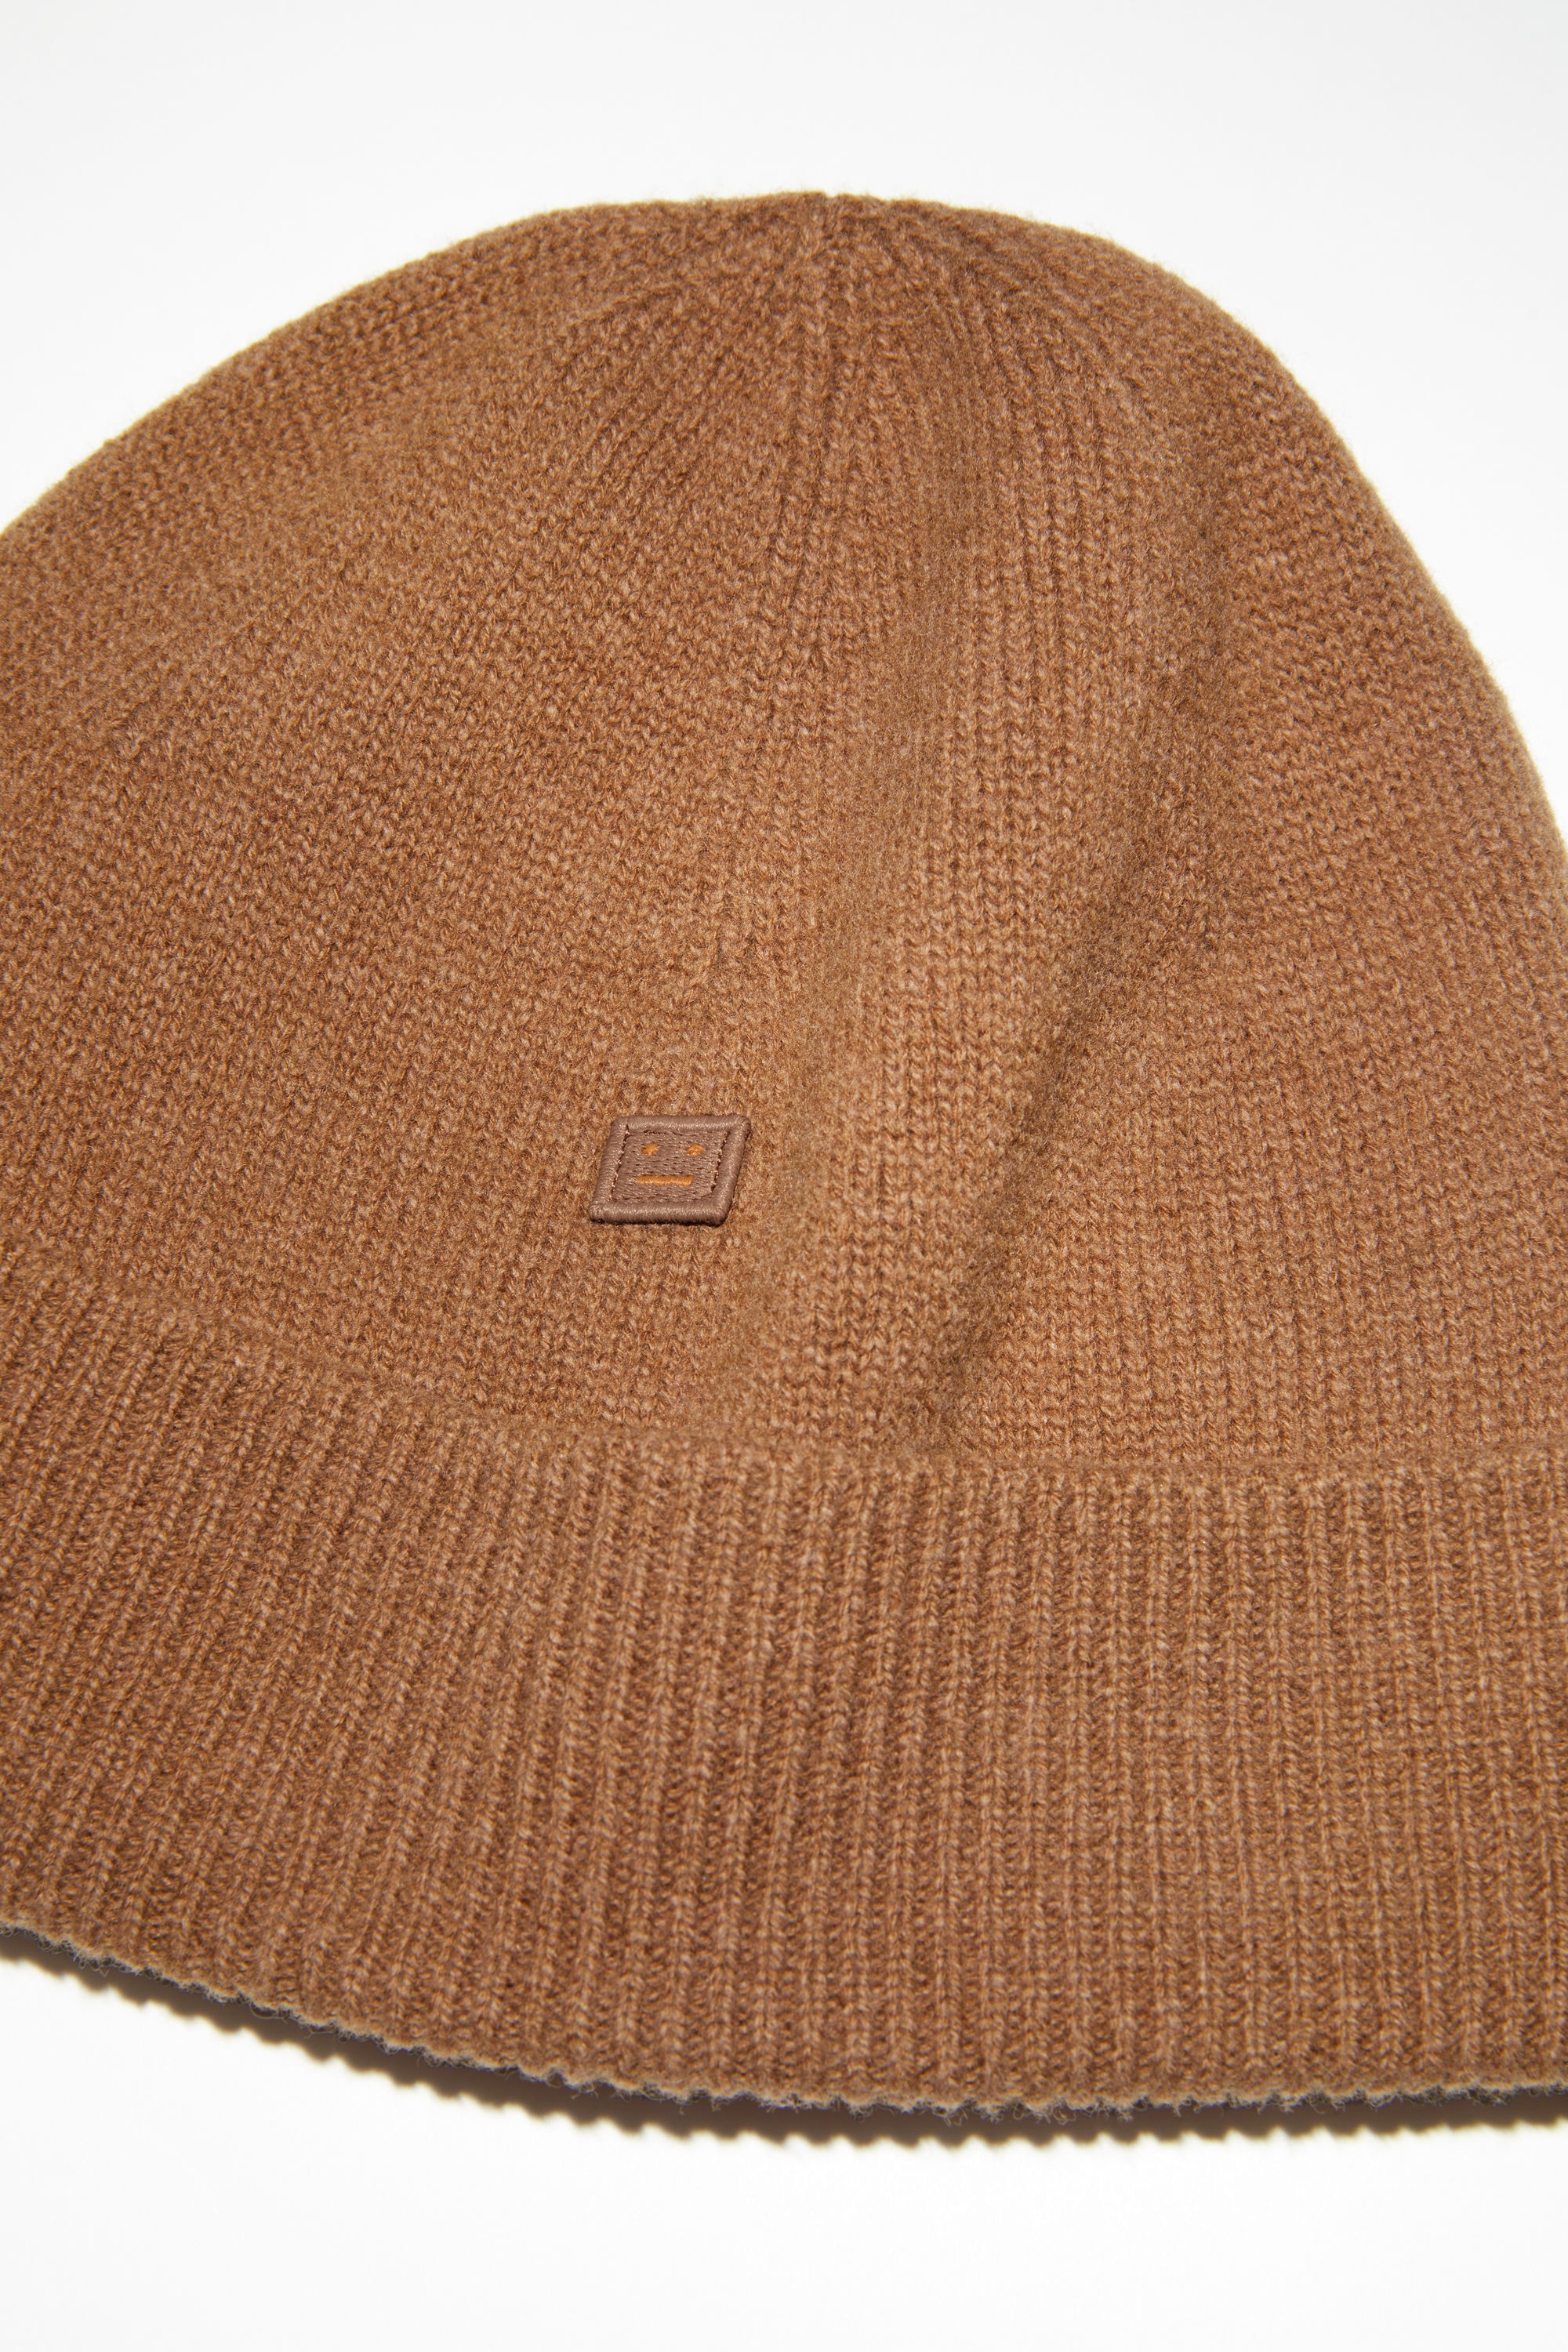 Micro face patch beanie - Toffee brown - 4